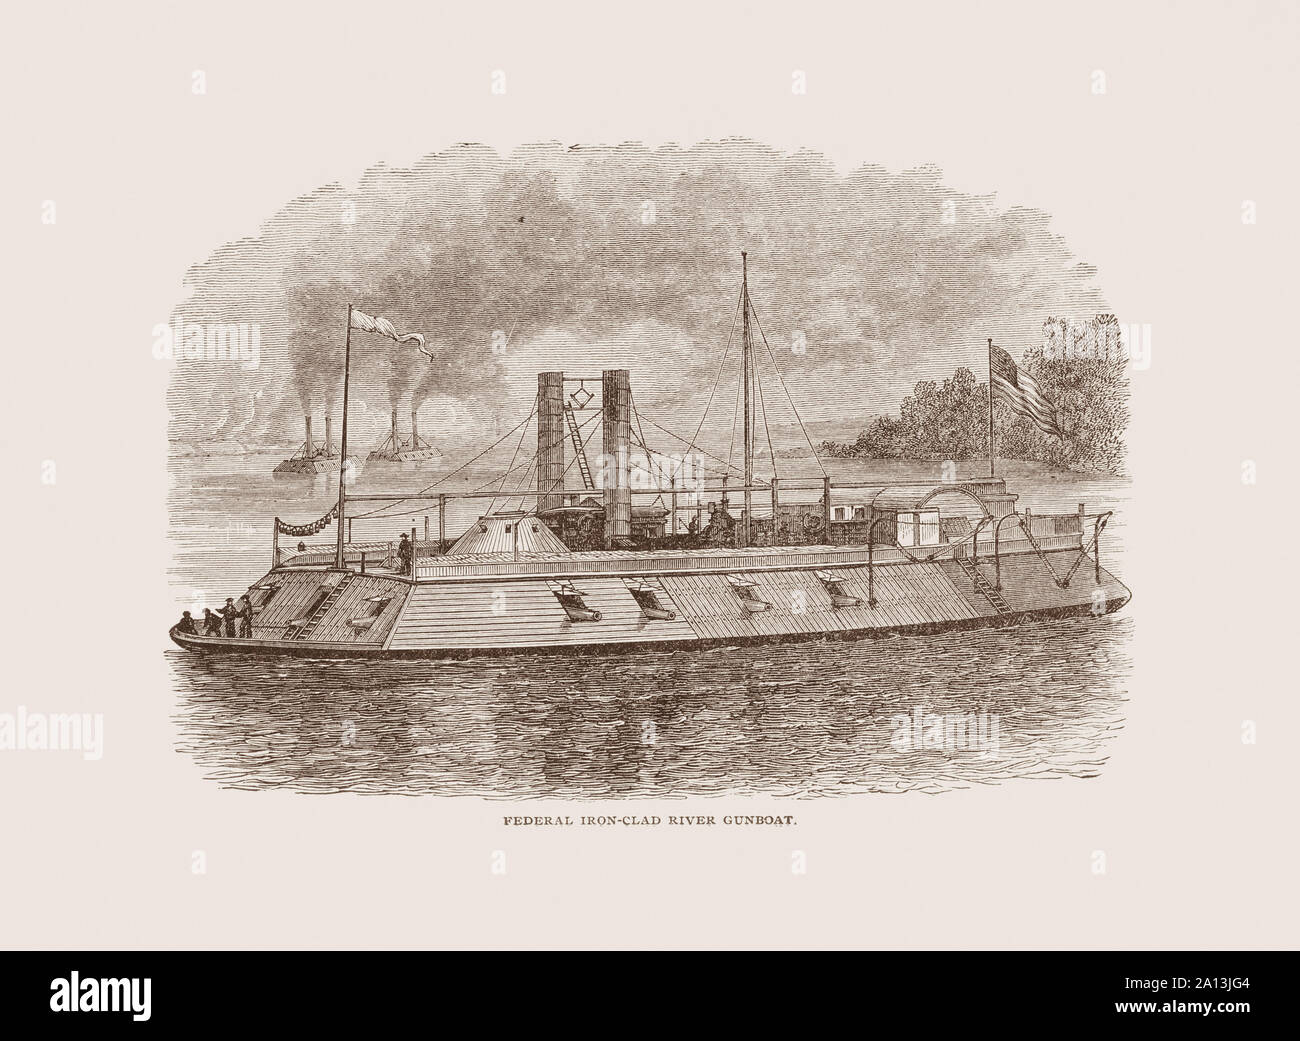 American Civil War history engraved print of a Union ironclad river gunboat. Stock Photo